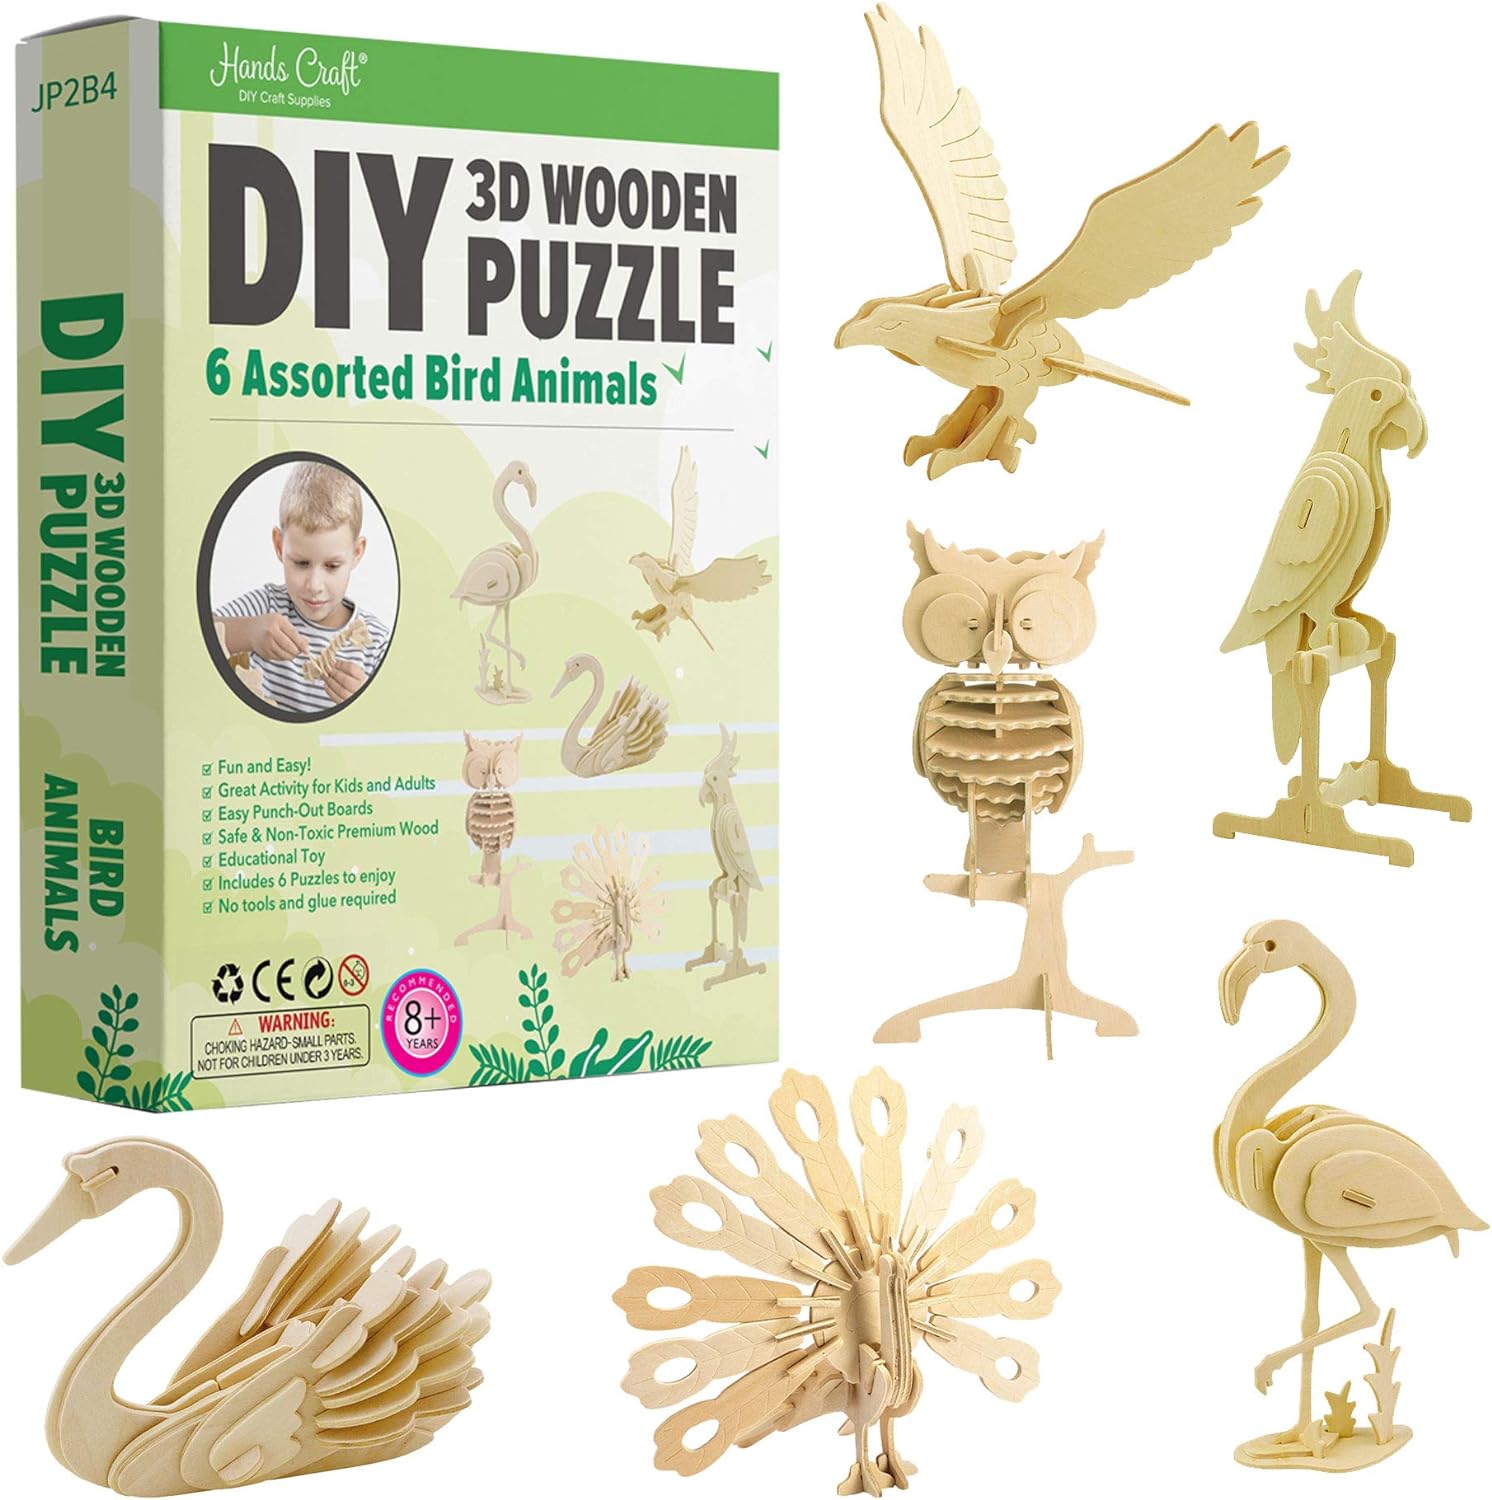 Hands Craft DIY 3D Wooden Puzzle  6 Assorted Bird Animals Bundle Pack Set Brain Teaser Puzzles Educational STEM Toy Adults and Kids to Build Safe and Non-Toxic Easy Punch Out Premium Wood JP2B4